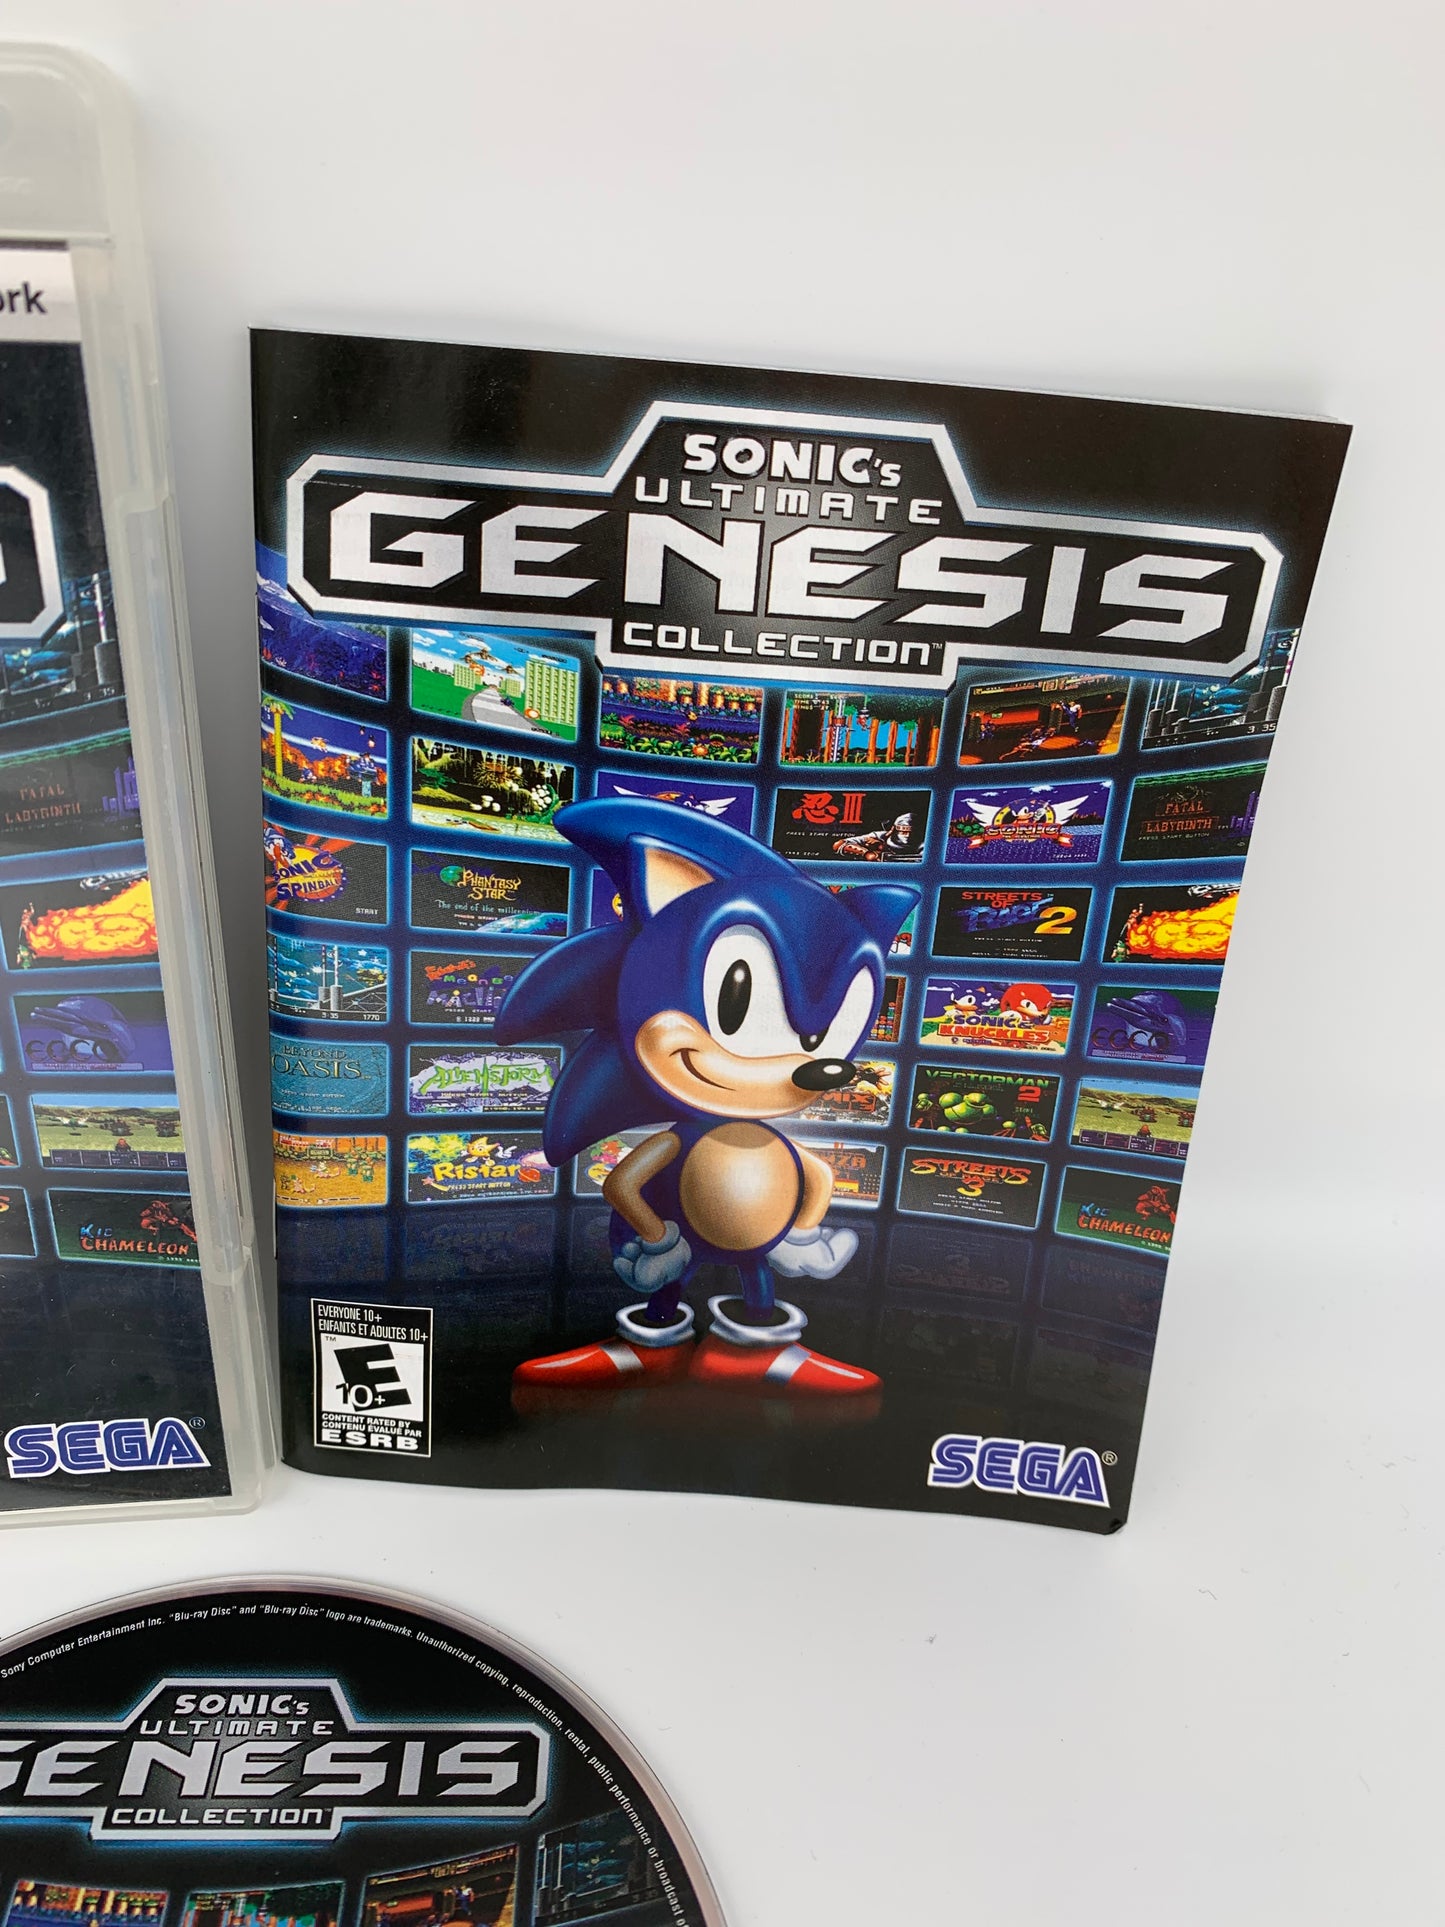 SONY PLAYSTATiON 3 [PS3] | SONiCS ULTiMATE GENESiS COLLECTiON